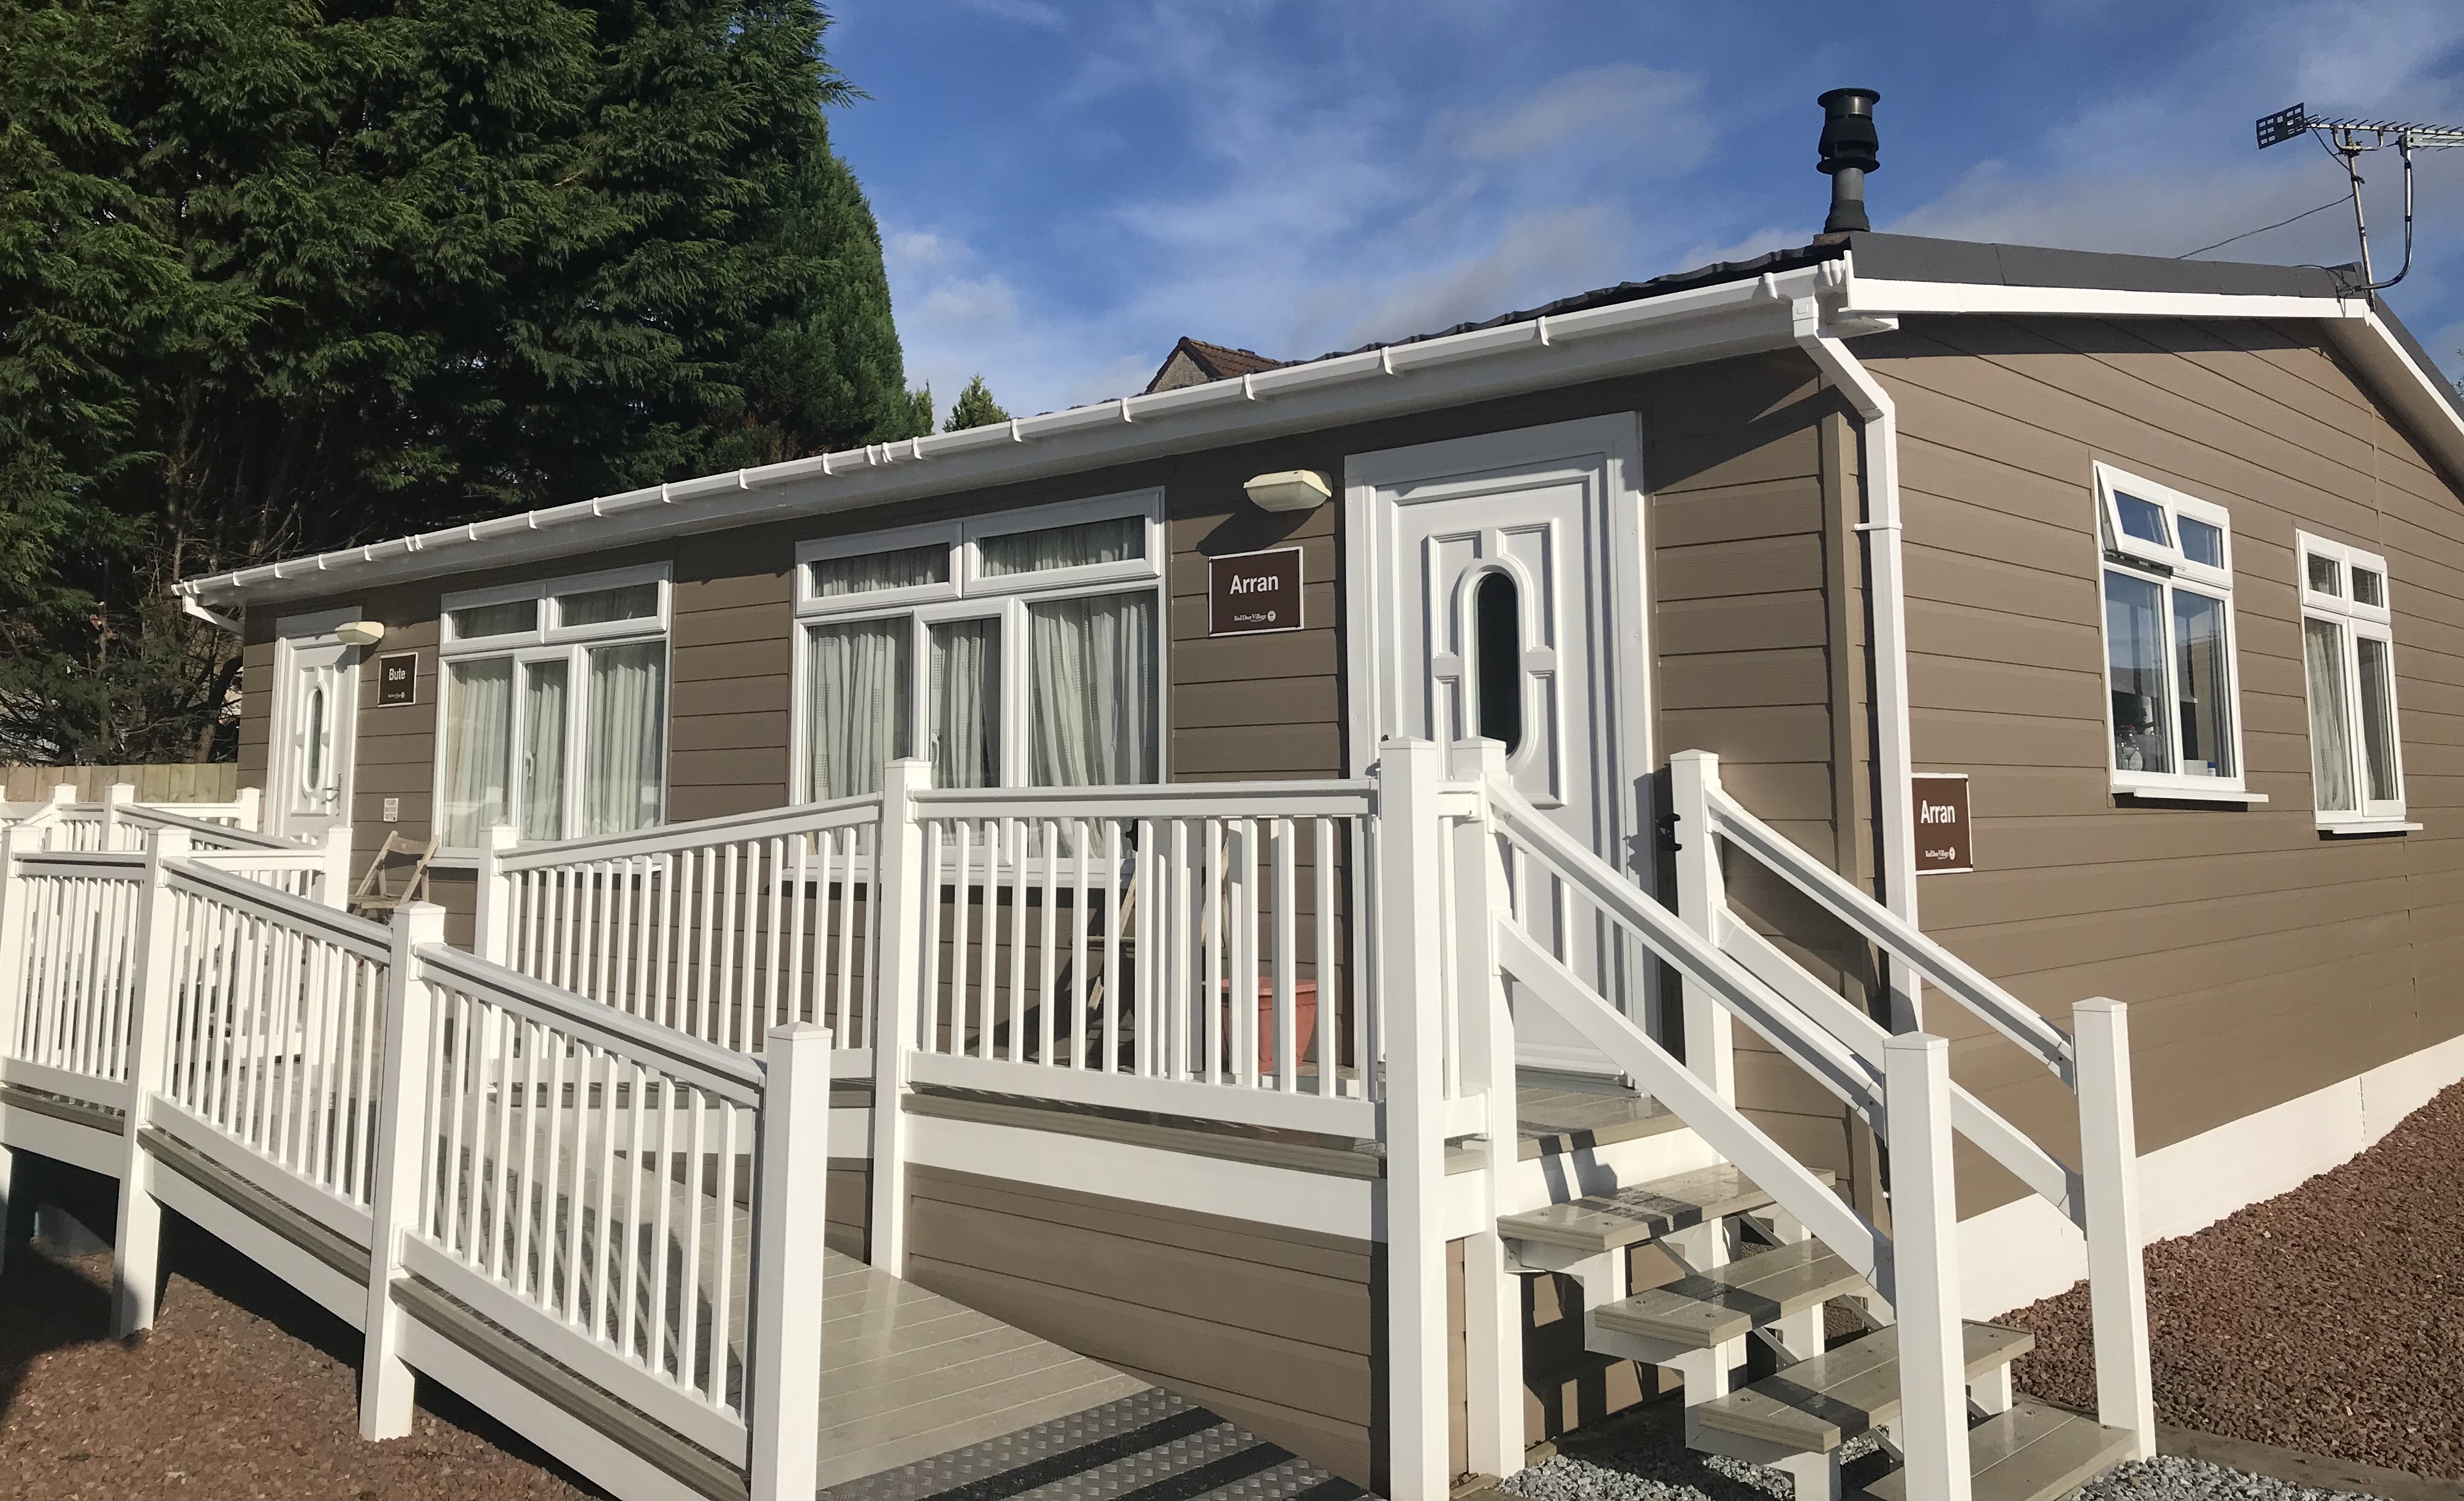 chalet accommodation to rent at red deer village holiday park, glasgow